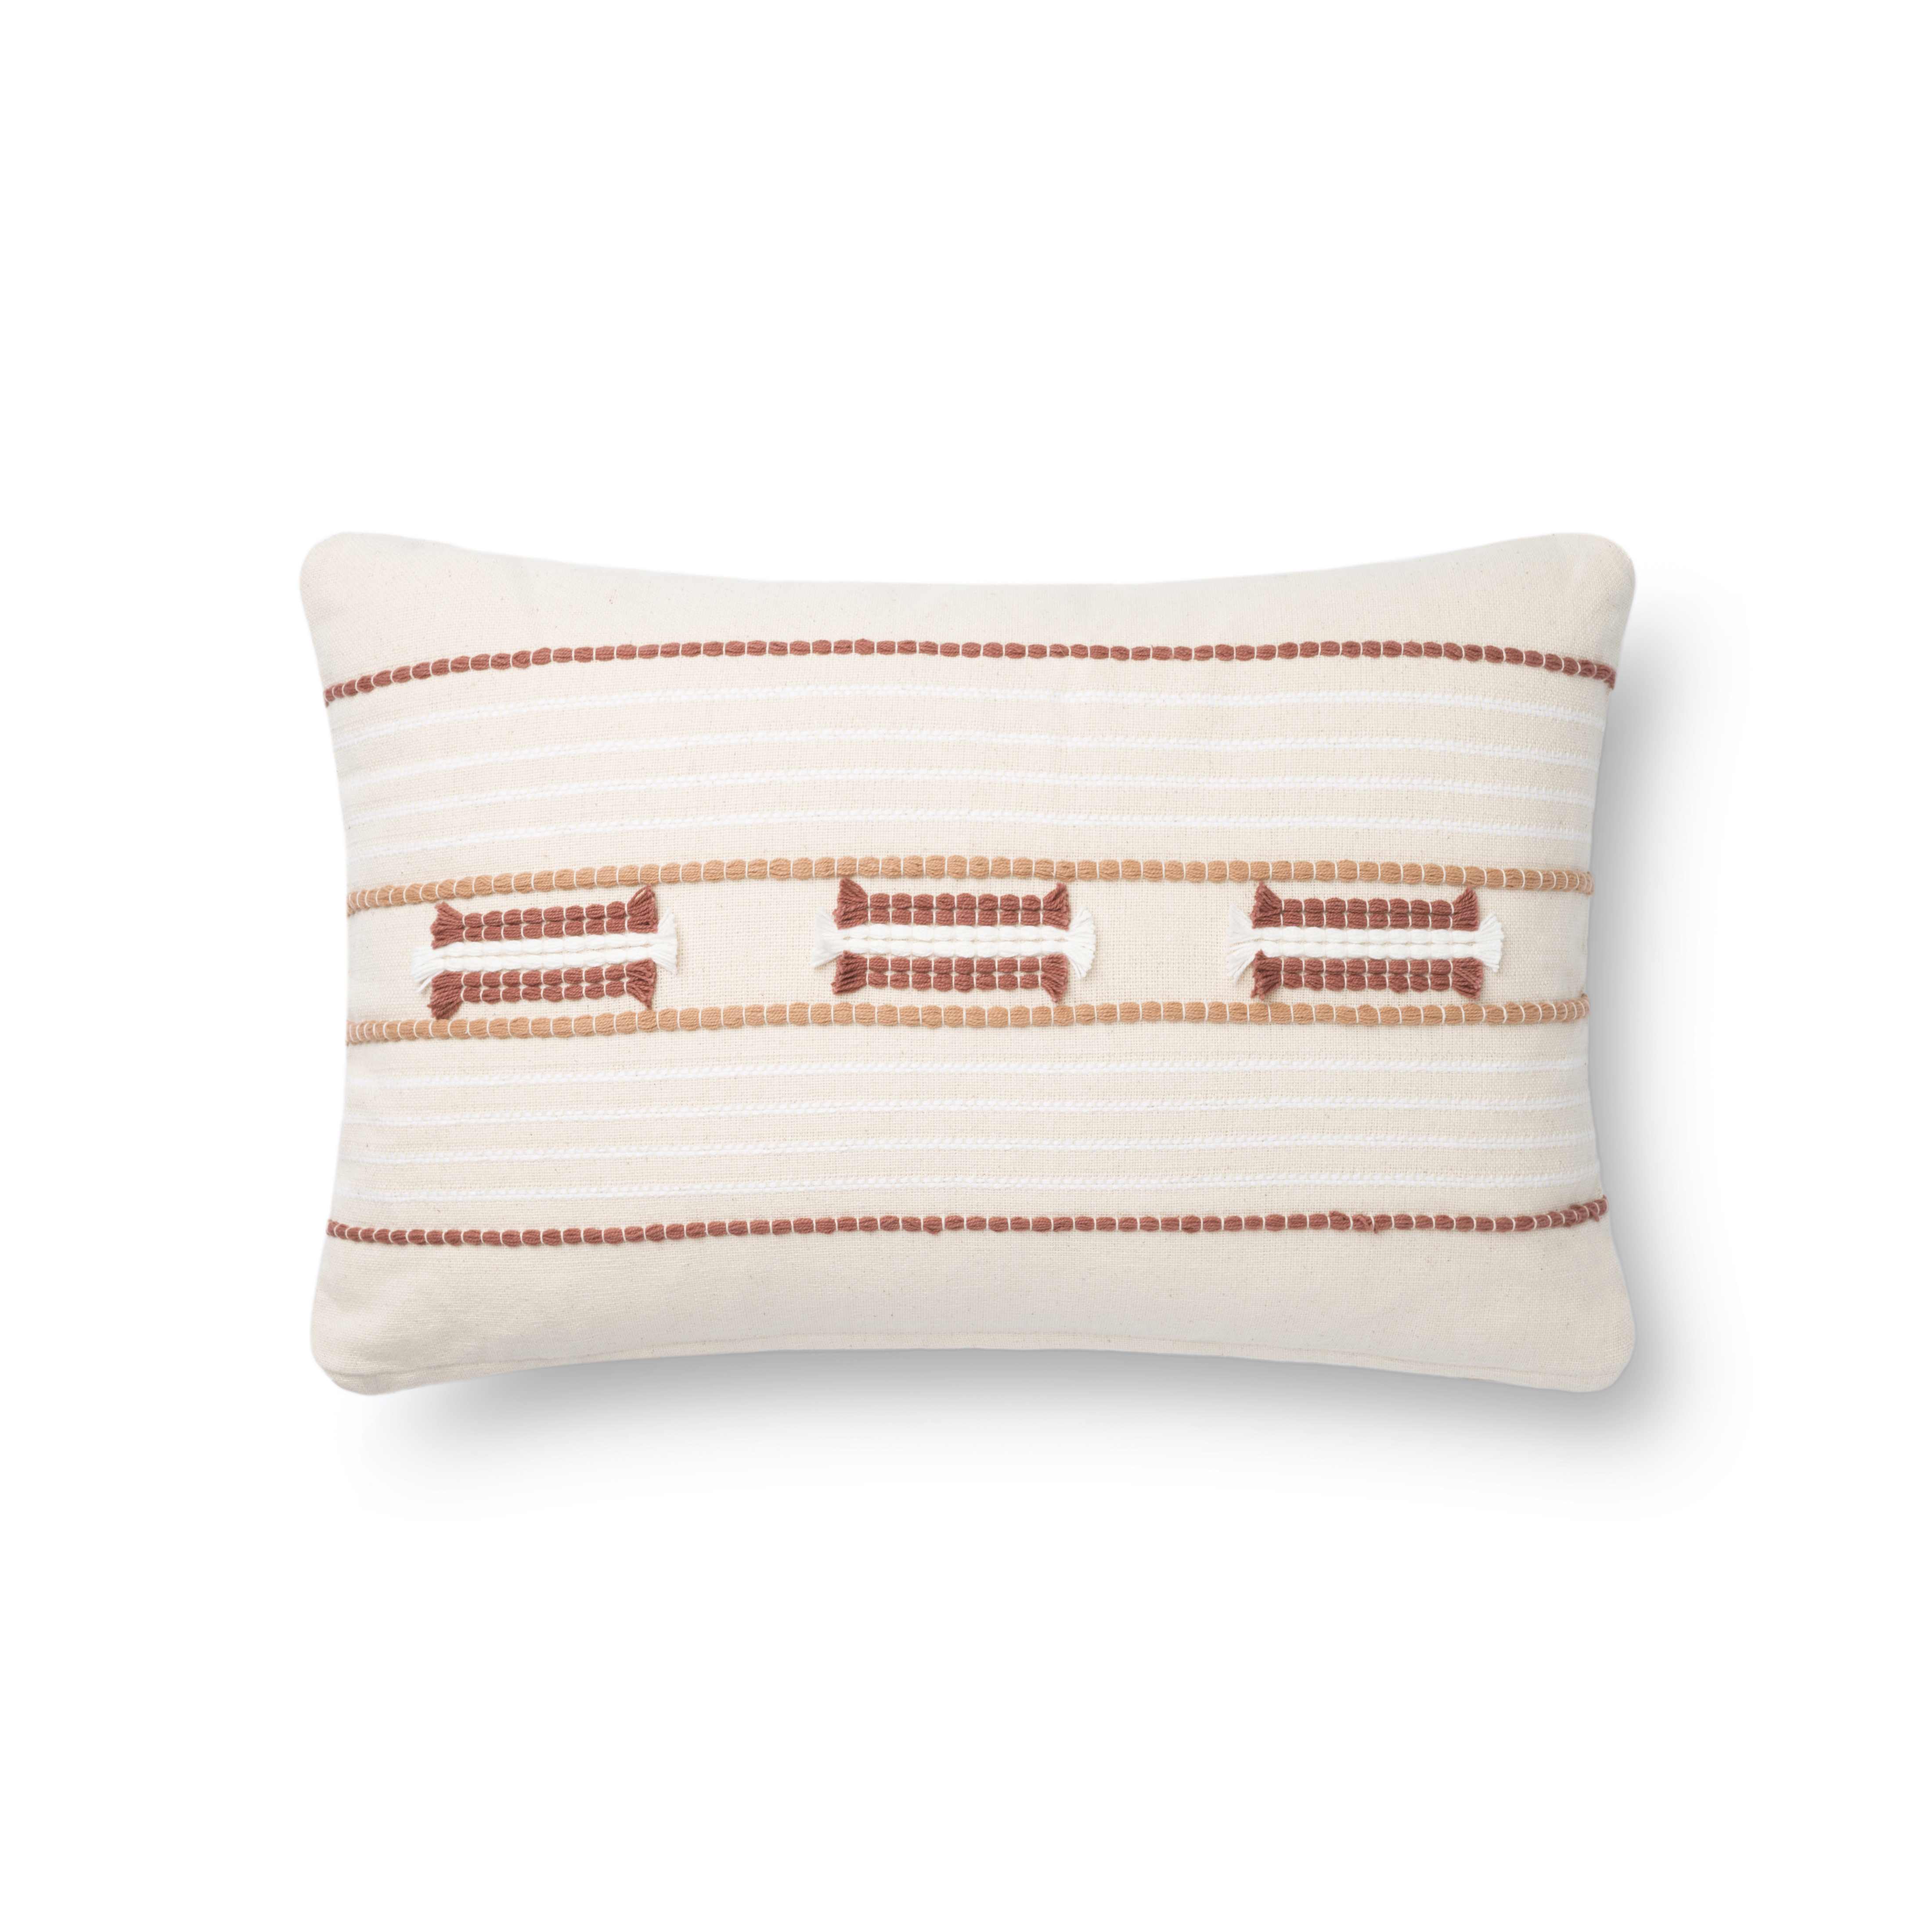 Magnolia Home by Joanna Gaines x Loloi Pillows P1141 Natural / Spice 13" x 21" Cover Only - Image 0